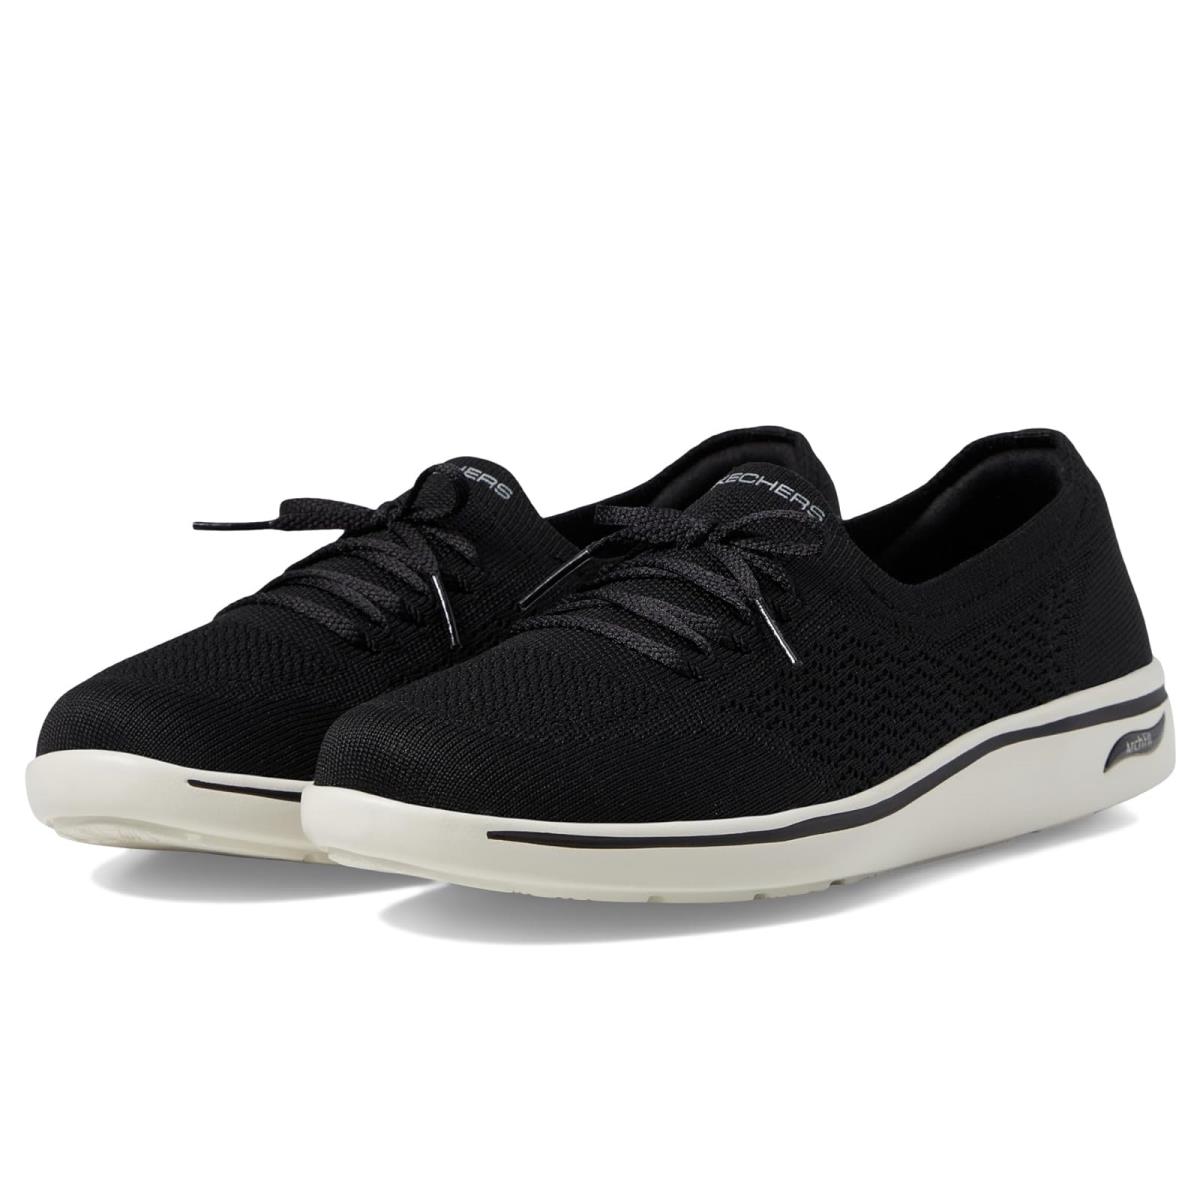 Woman`s Shoes Skechers Performance Arch Fit Uplift - Florence Black/White